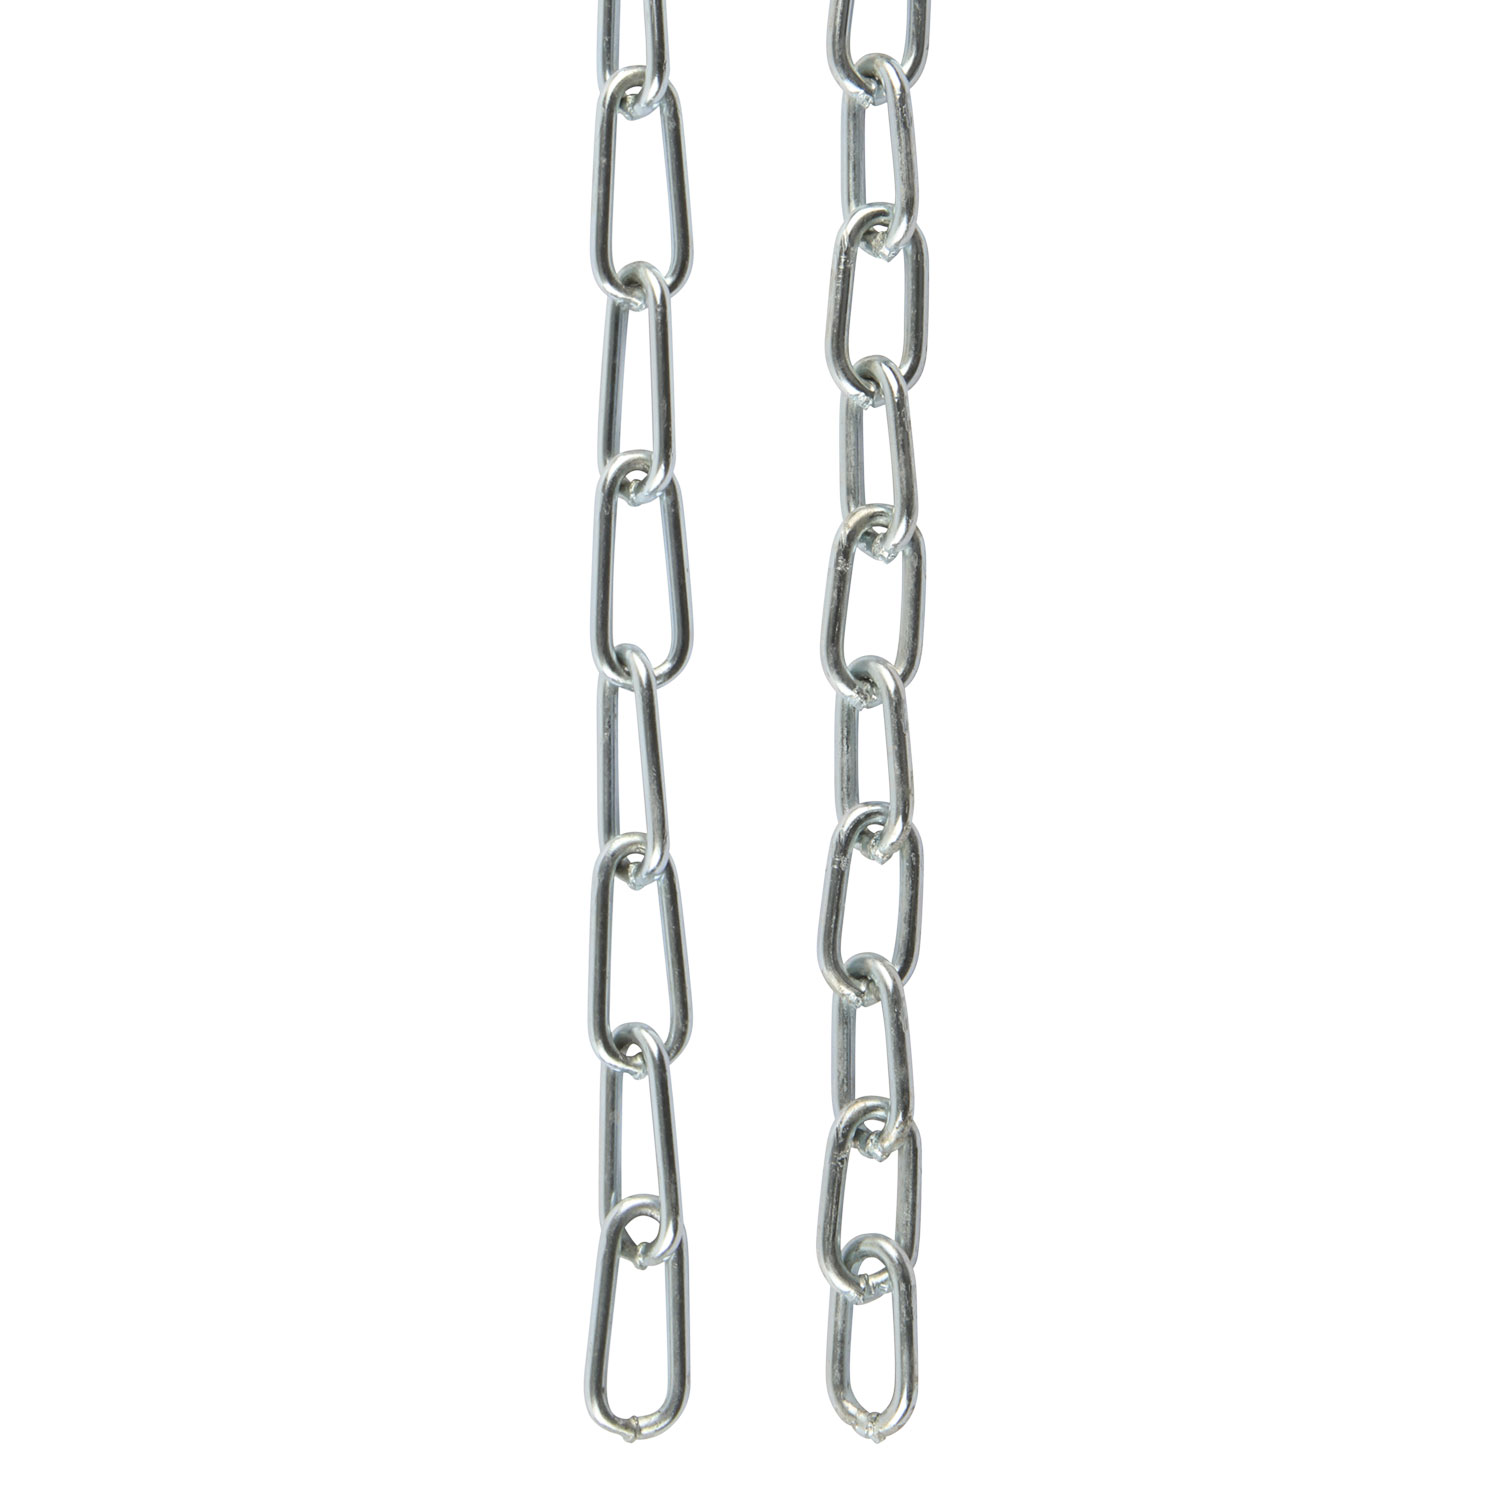 Perfection Chain Products 54679 #2 Plumbers Chain 10 FT Carton Plated Steel Zinc 